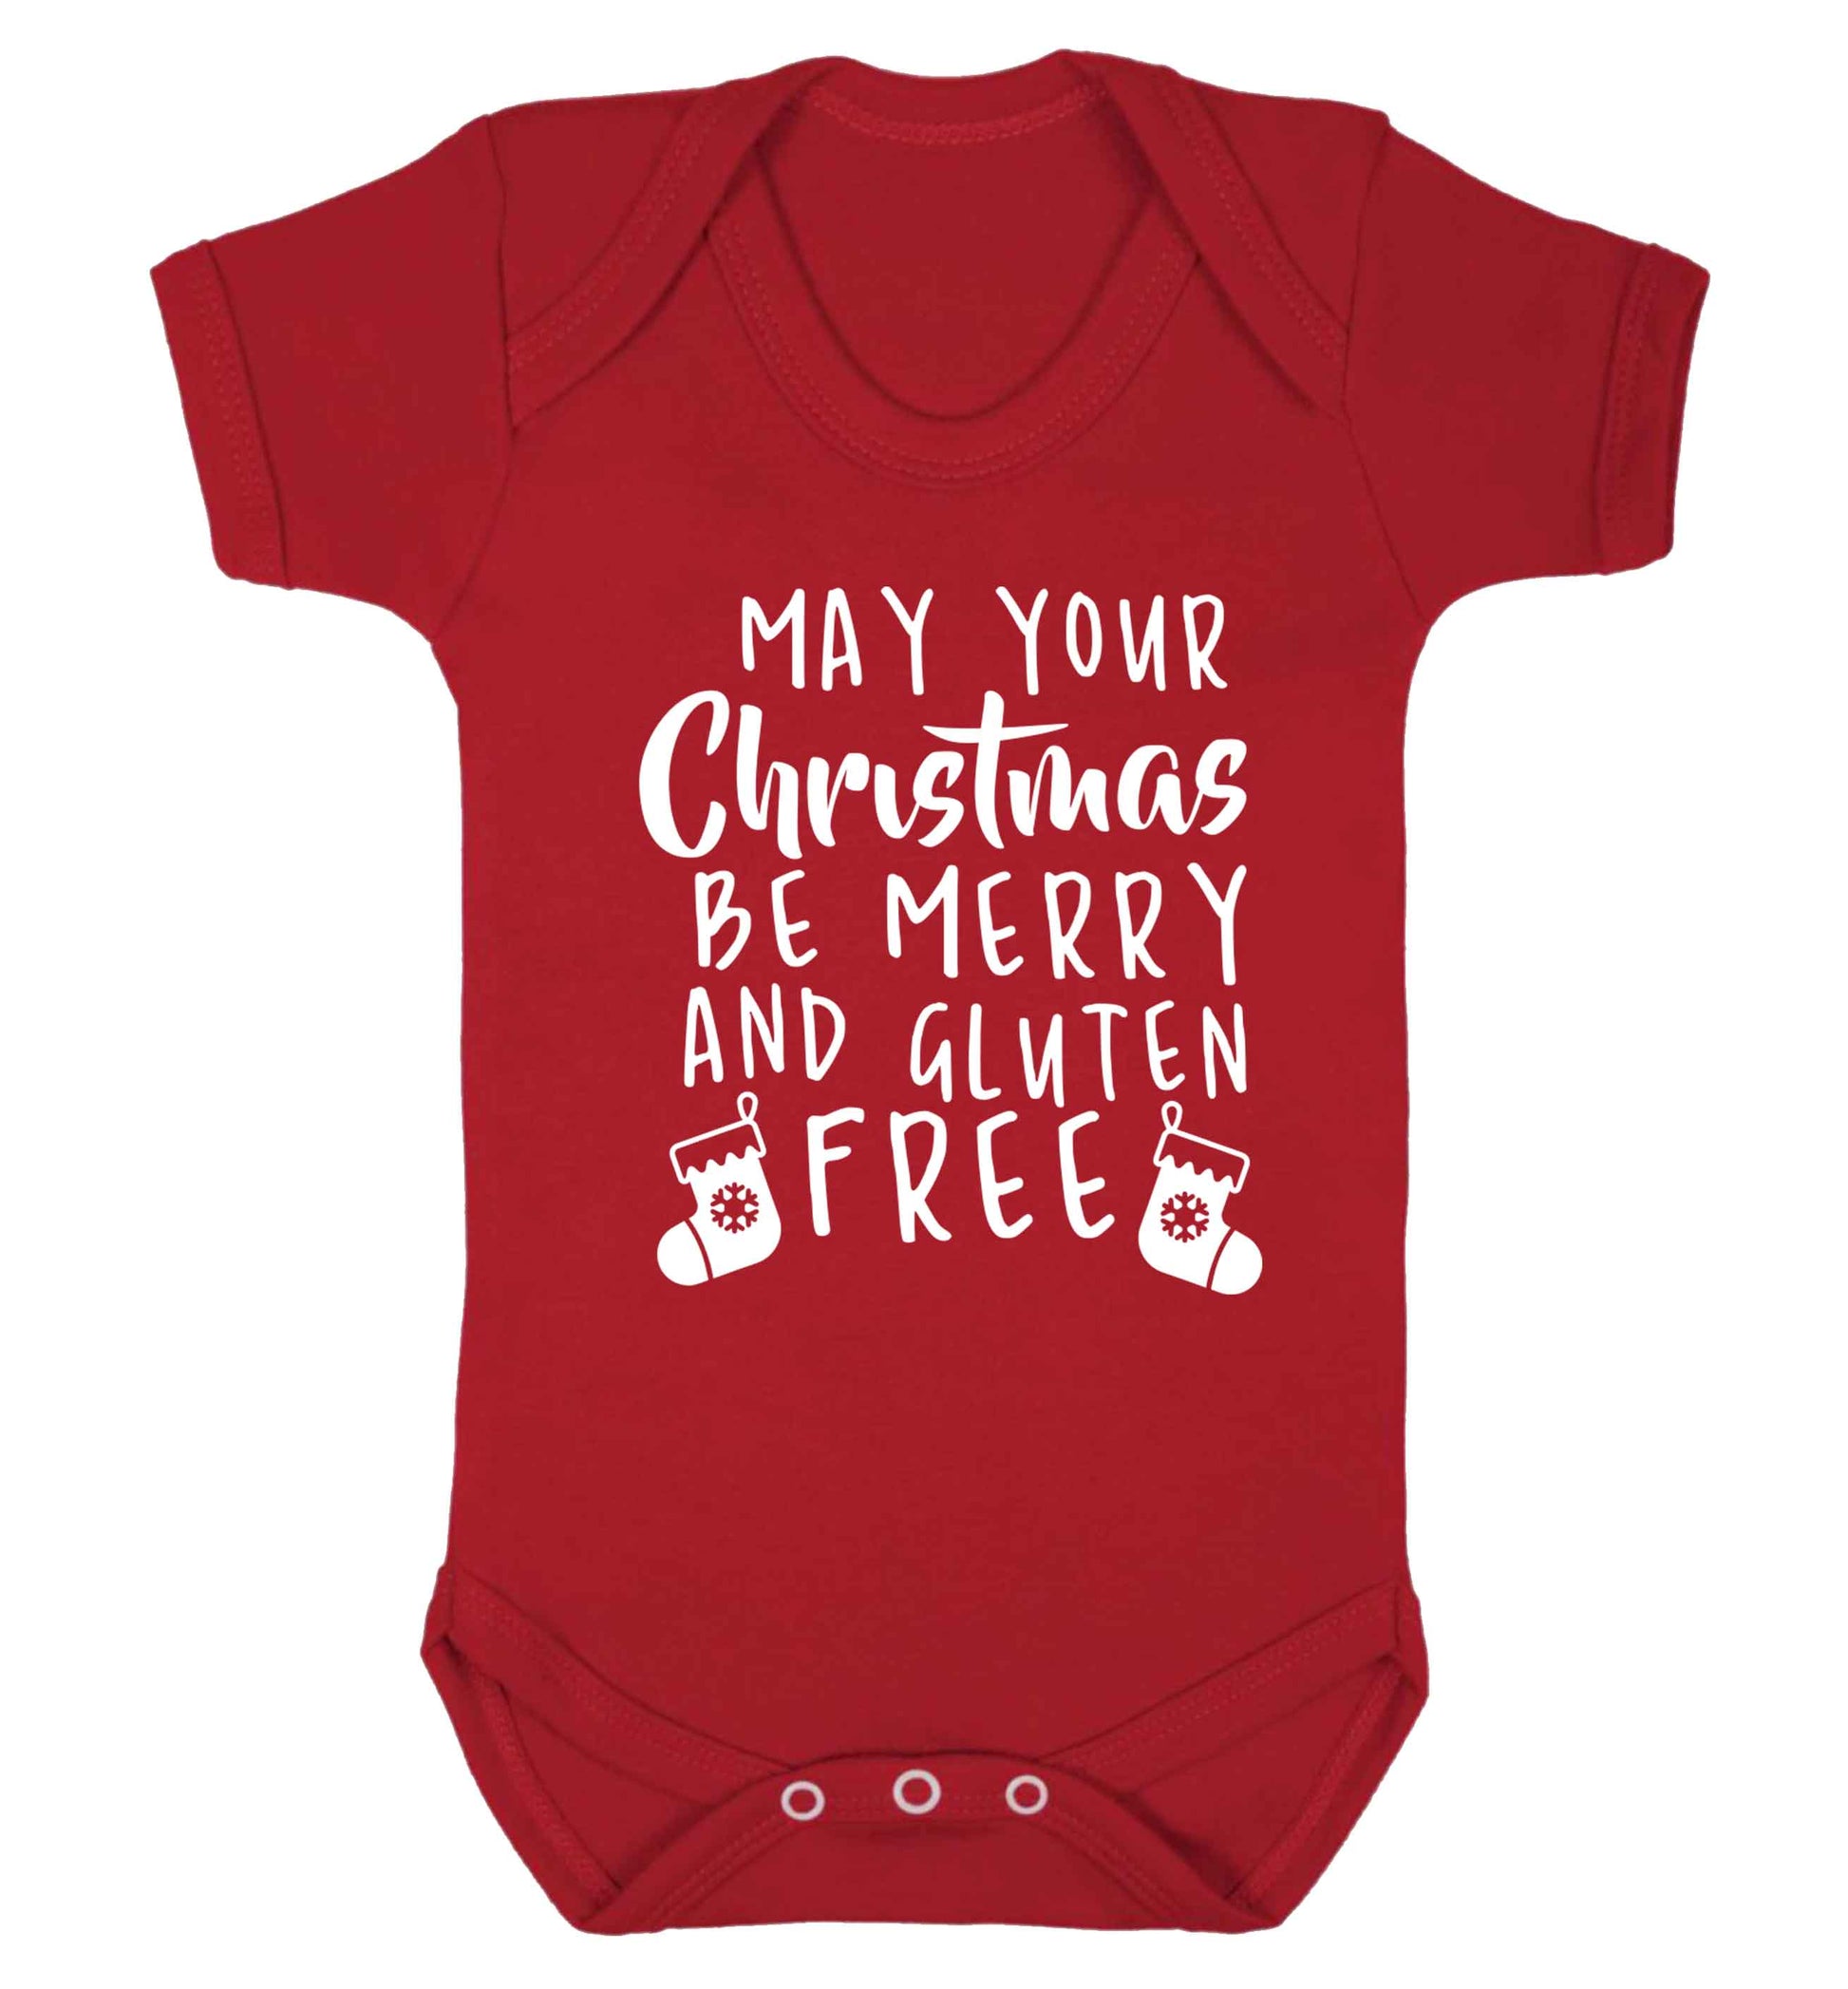 May your Christmas be merry and gluten free Baby Vest red 18-24 months